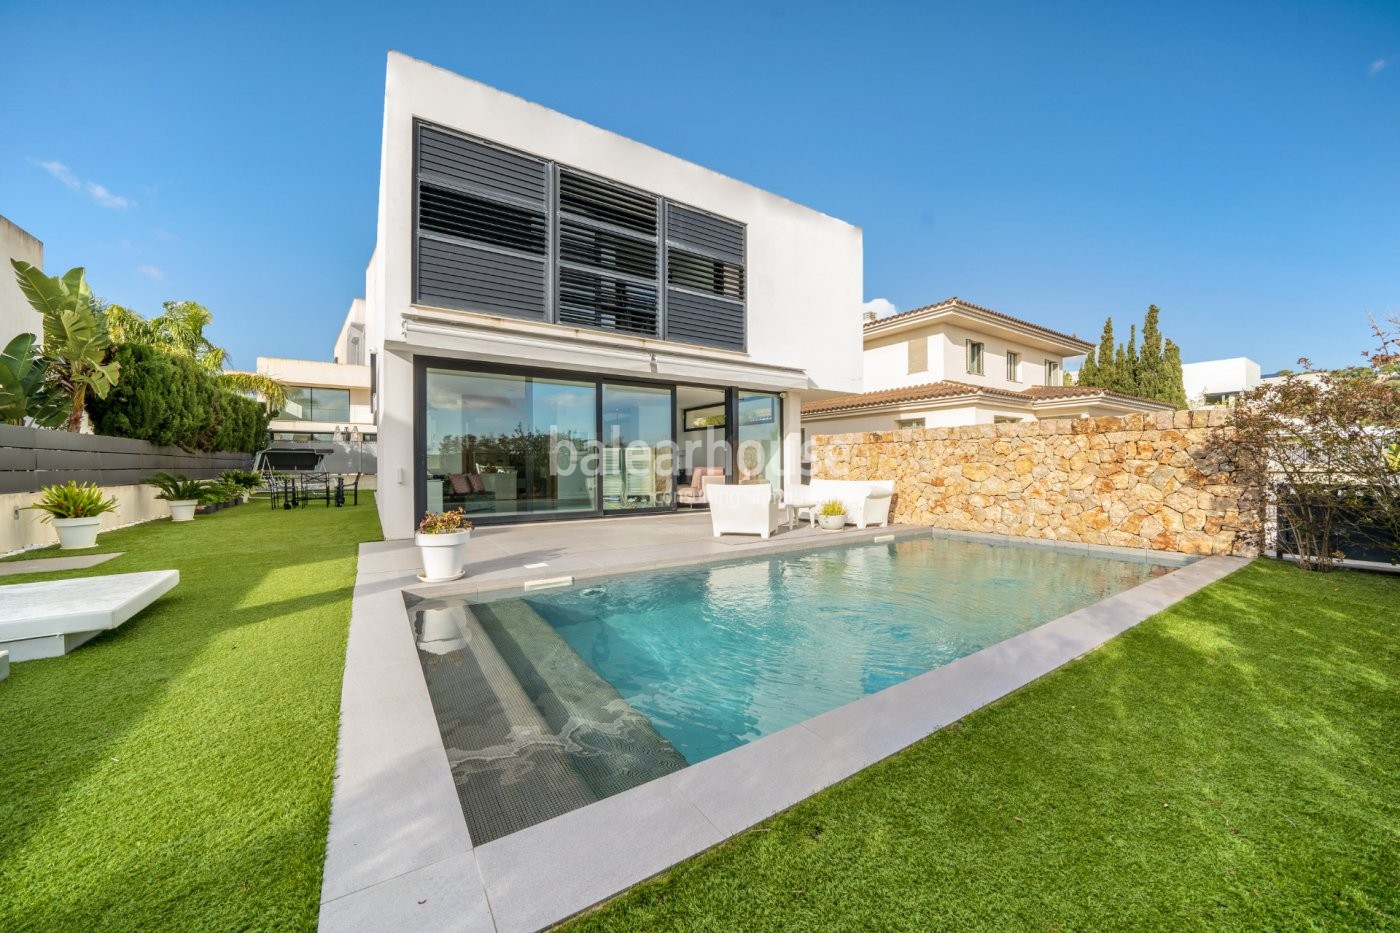 Bright and modern villa with garden and swimming pool located in a green area of Palma.